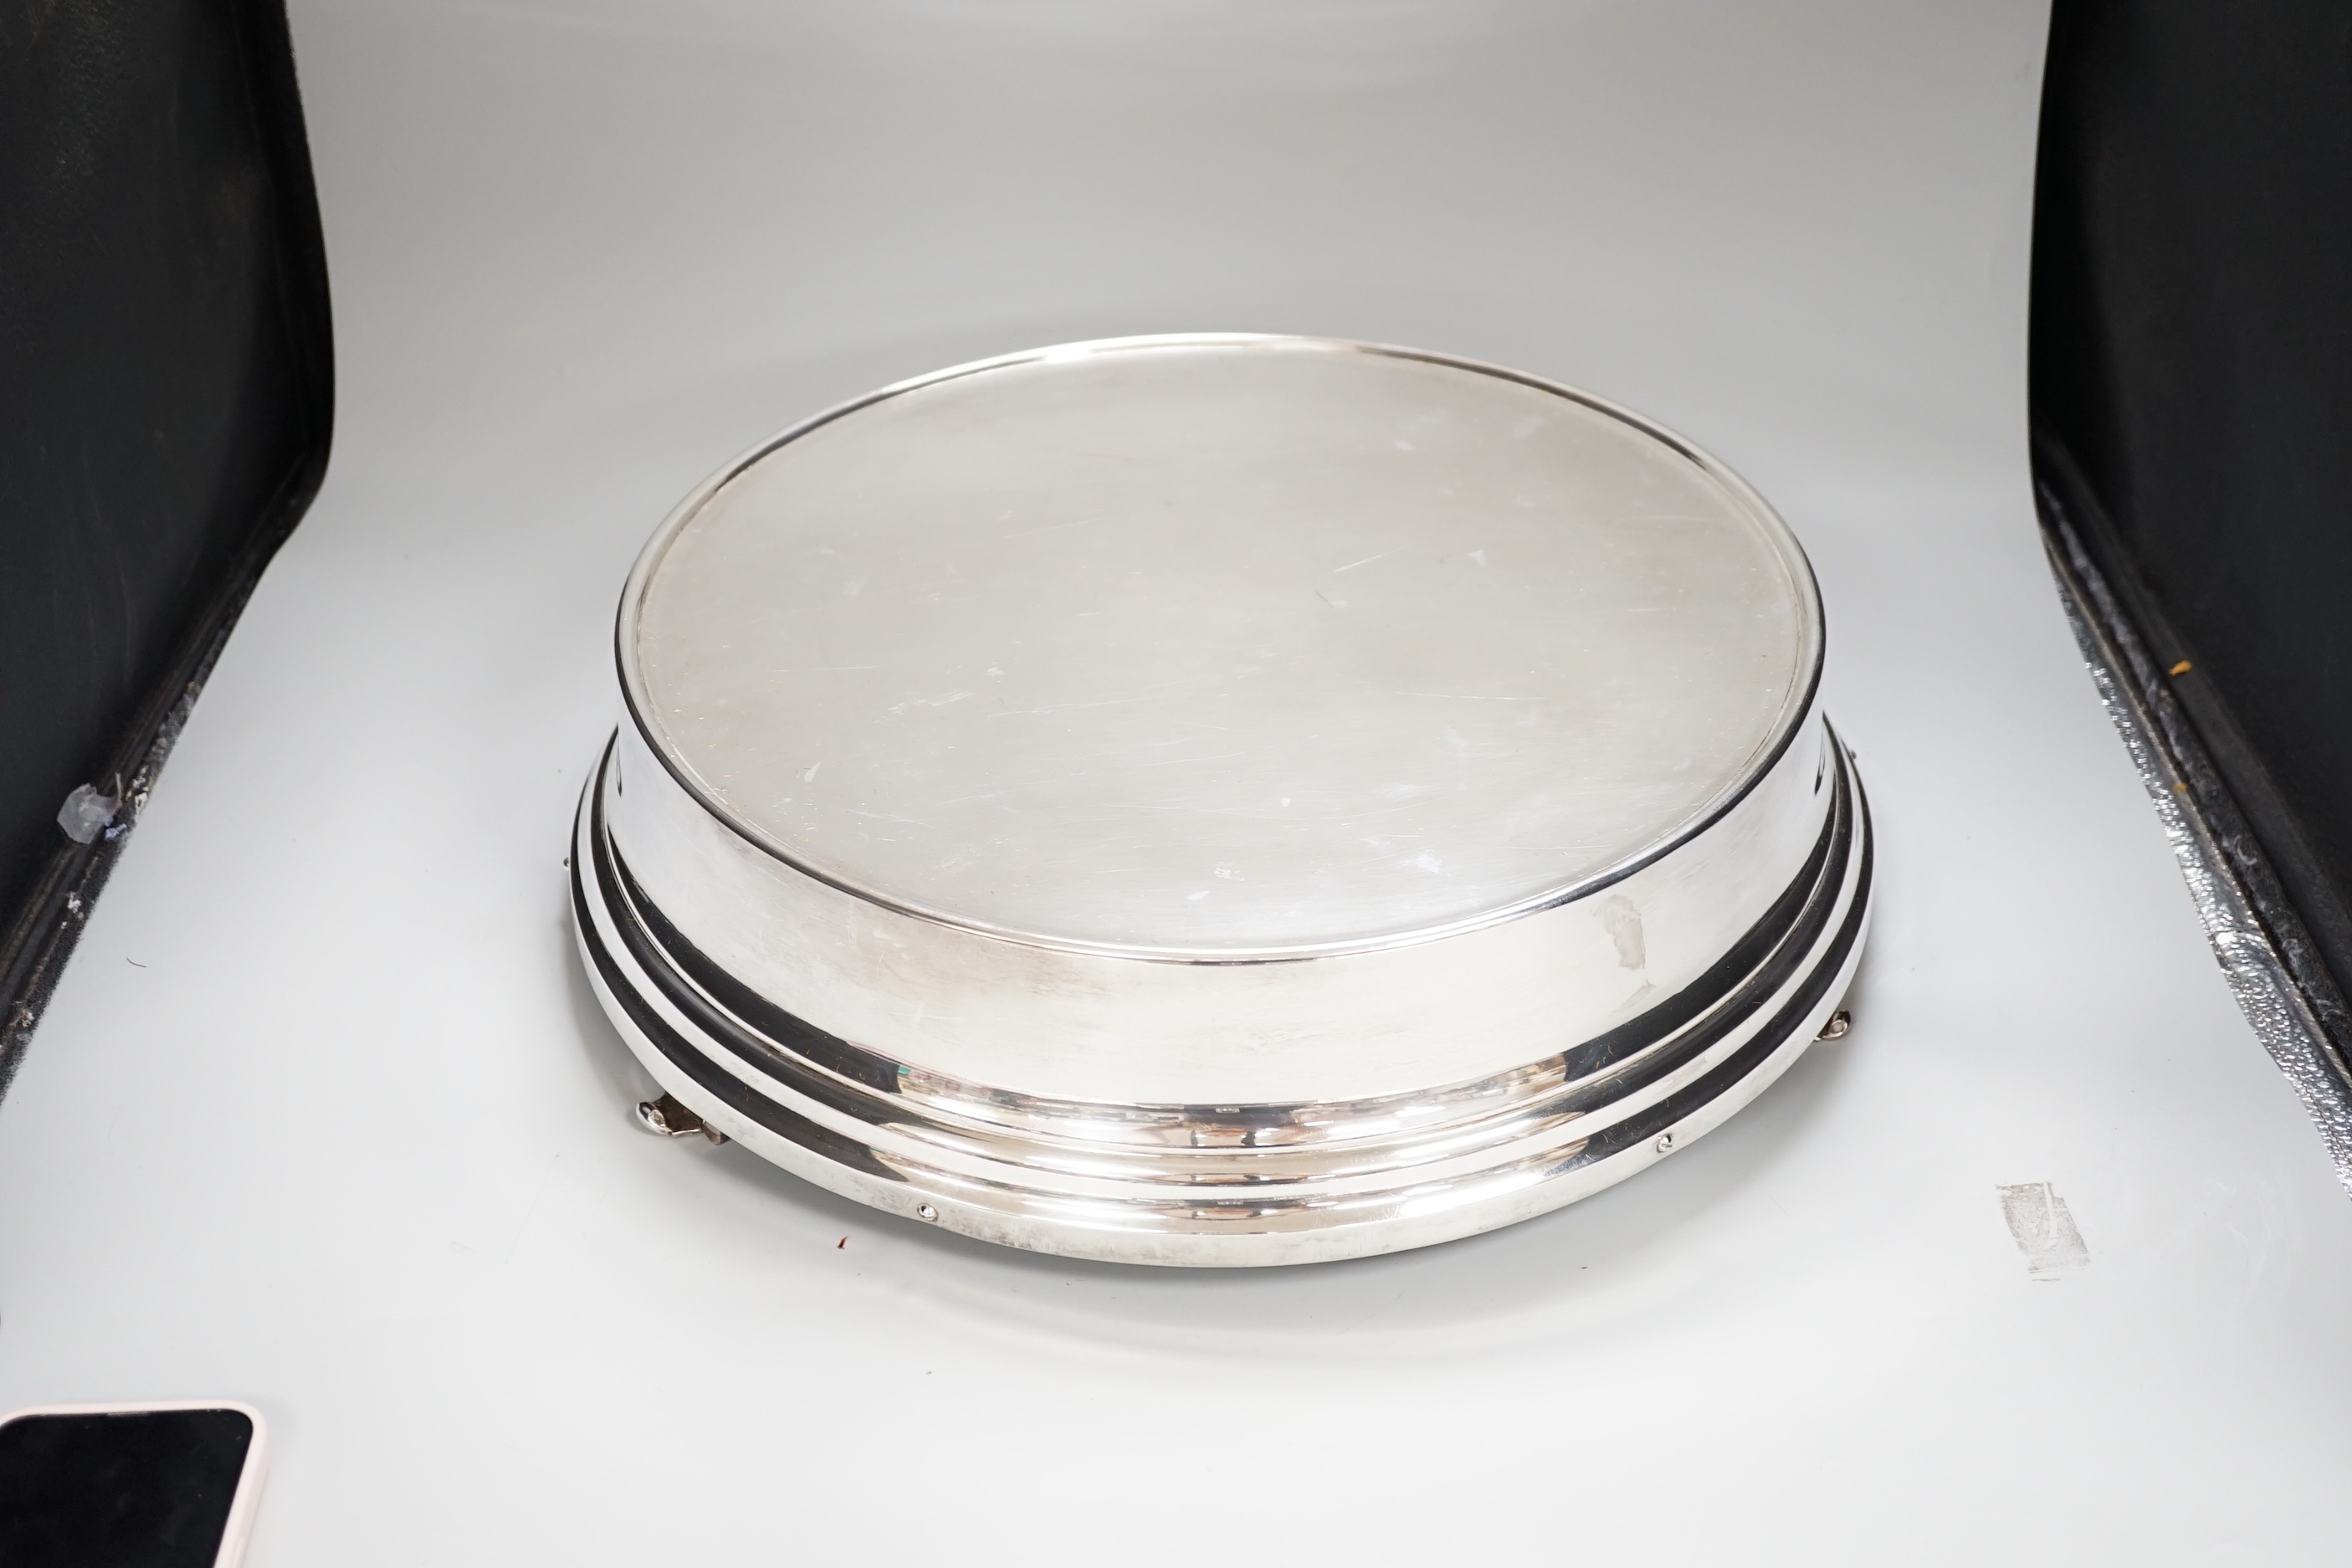 A silver plated wedding cake stand with original wooden box, 38.5 diameter